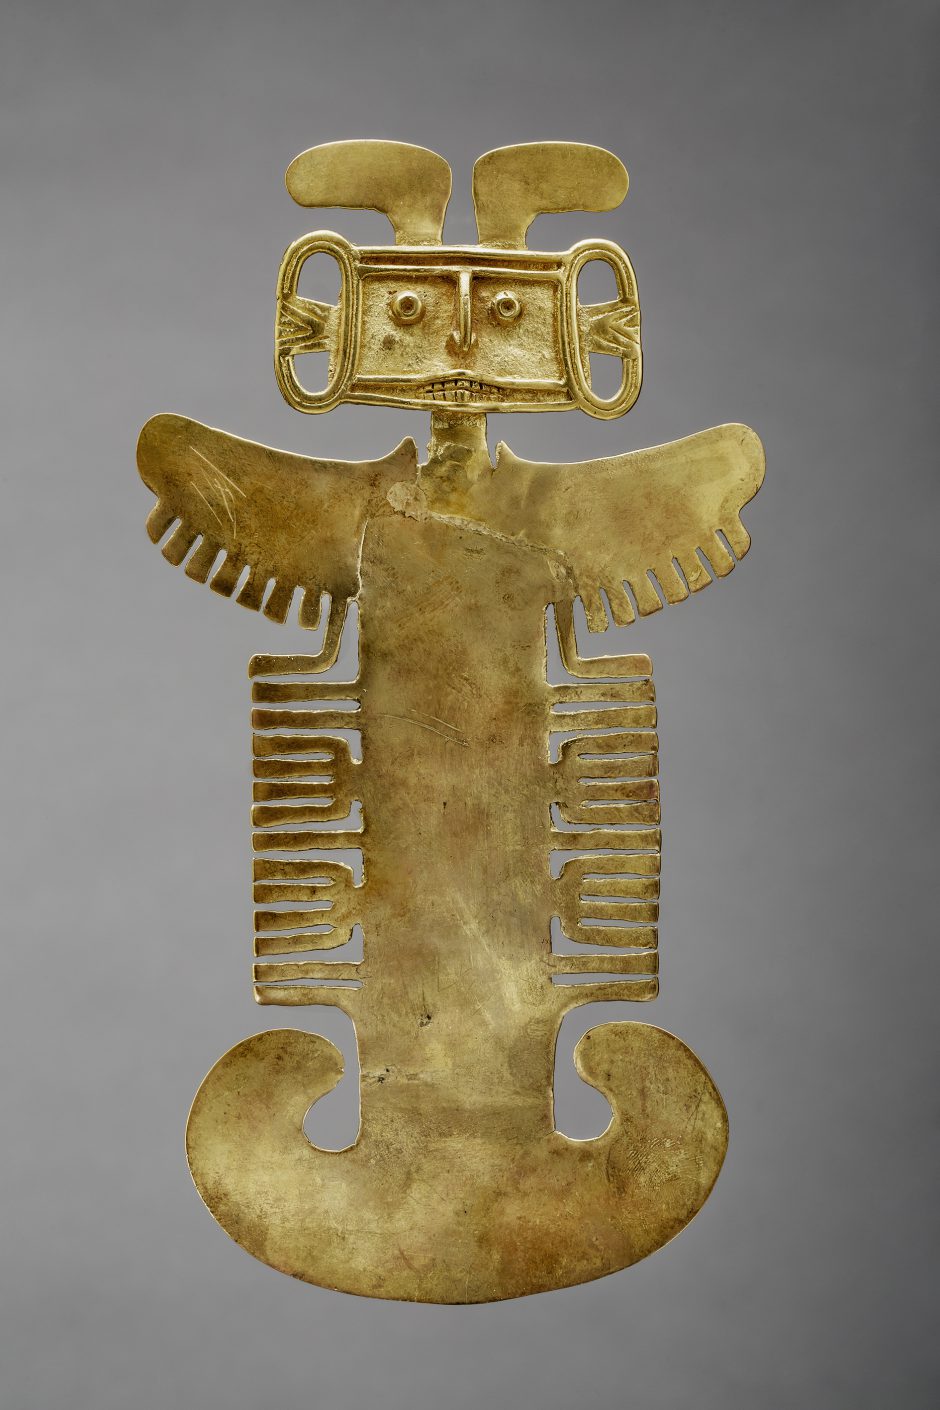 Breast pendant of a divine half-human half-animal creature, copper and gold, Tolima Style 100 - 1000 A.D.